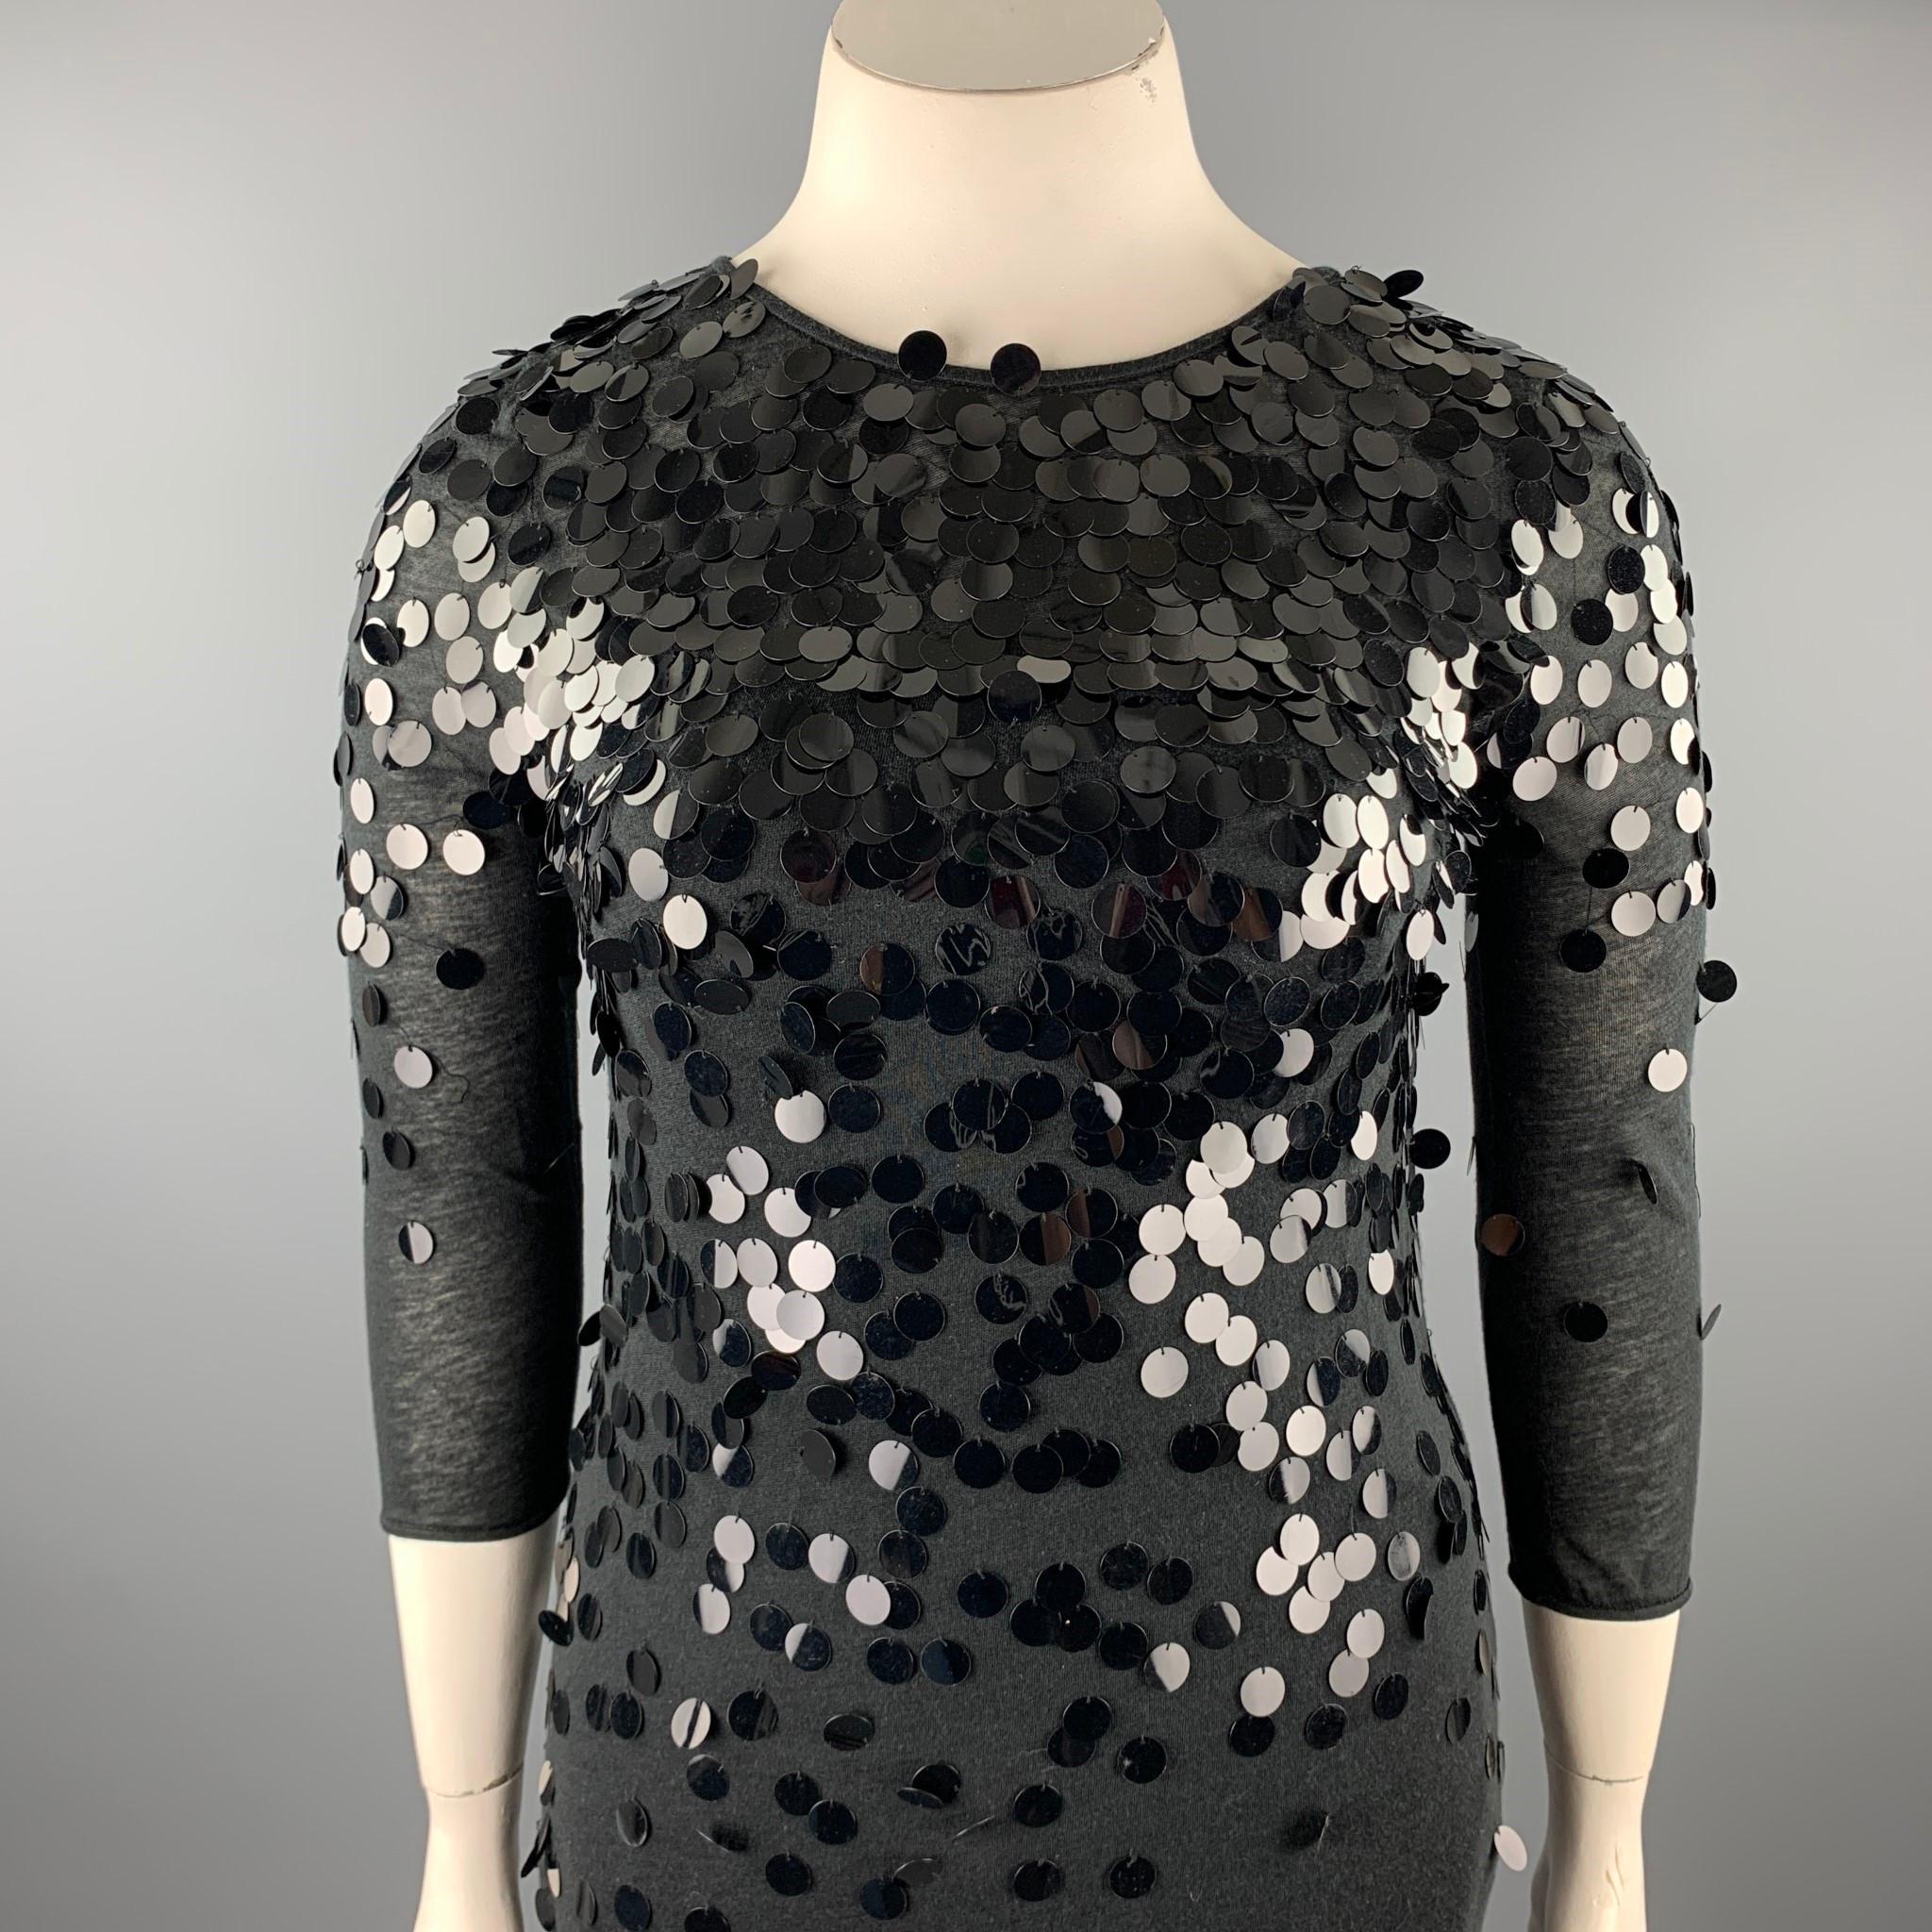 REBECCA TAYLOR dress comes in a black tencel blend with payette sequin details featuring a slip liner, 3/4 sleeves, and a back button closure. 

Good Pre-Owned Condition.
Marked: 10

Measurements:

Shoulder: 16 in. 
Bust: 33 in. 
Waist: 34 in. 
Hip: